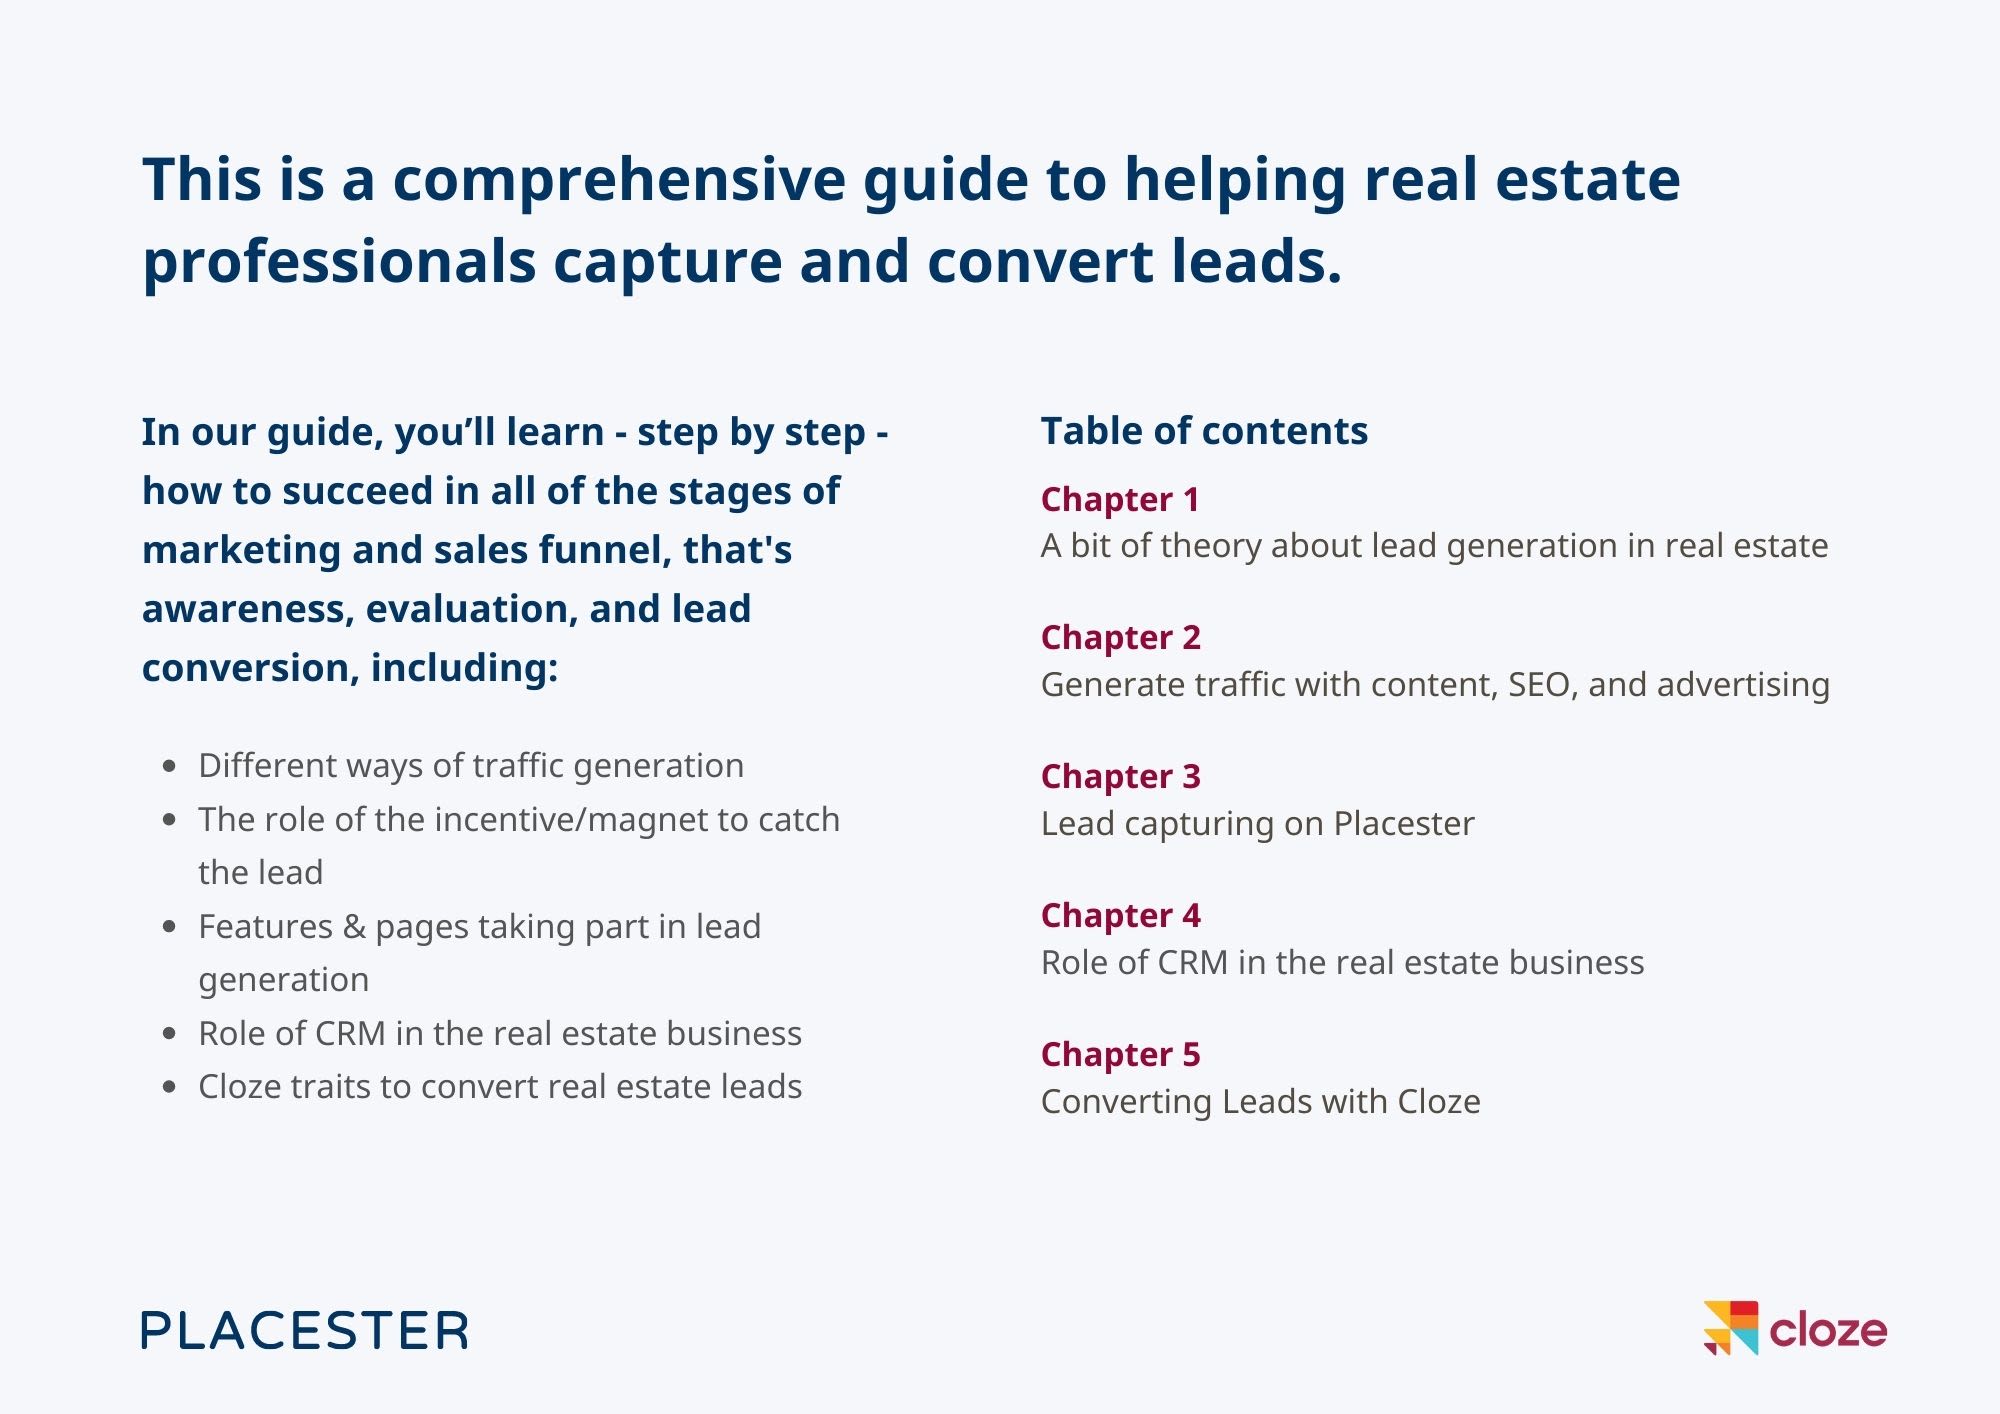 The Comprehensive Guide to Capturing and Converting Leads - Made by Placester and Cloze 